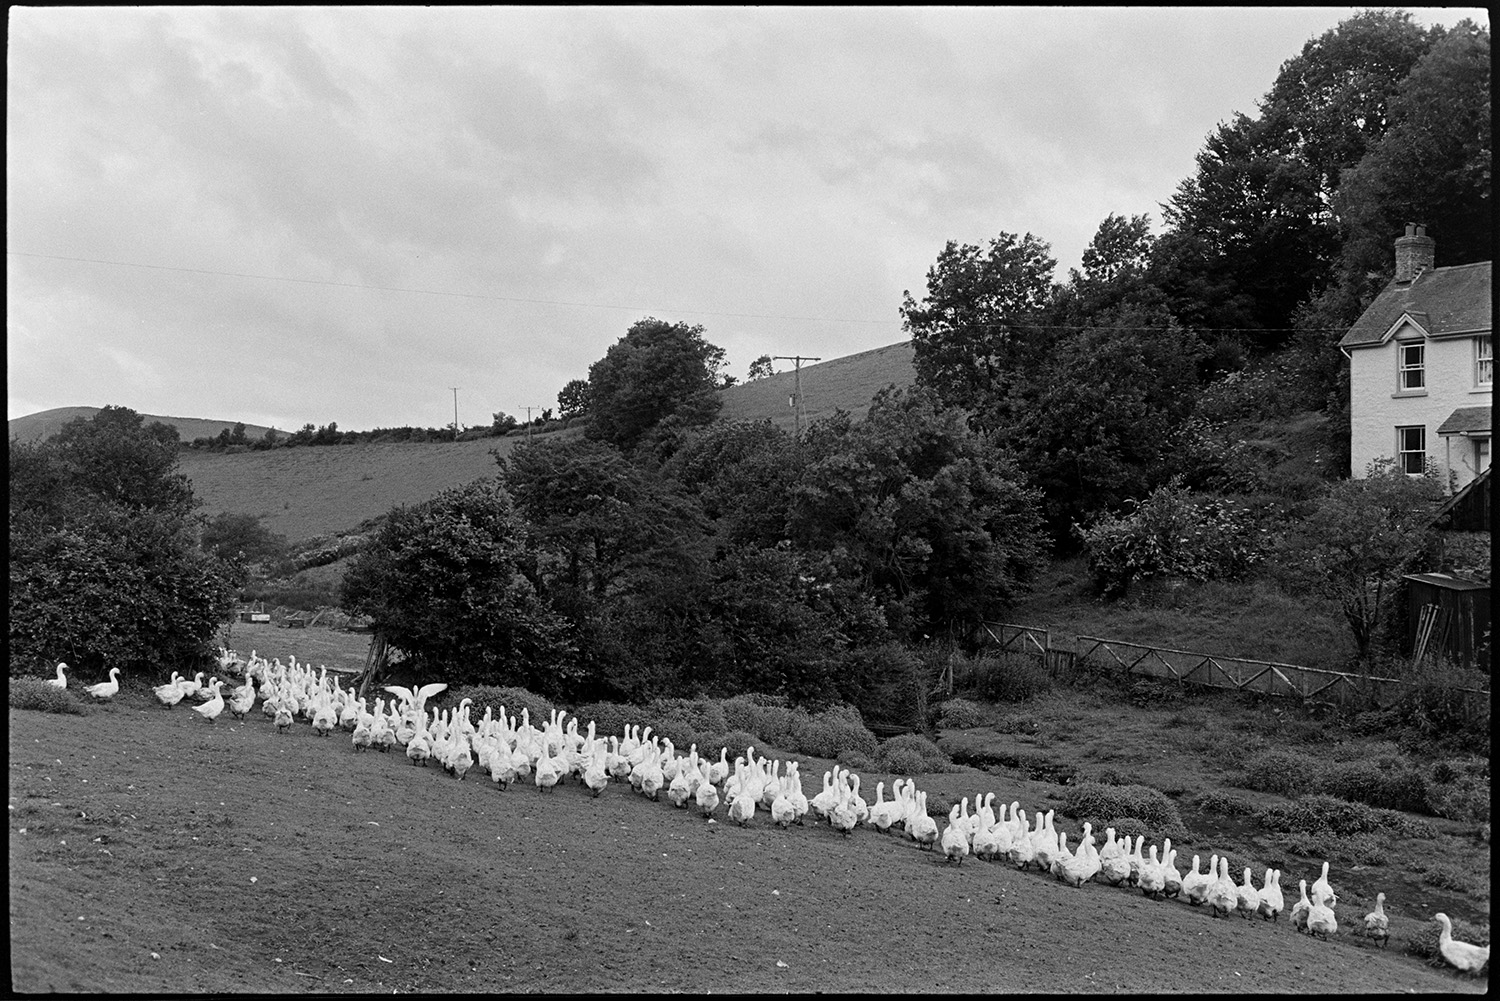 Geese in fields, large flock. 
[A large flock of geese in a field at Indiwell, Swimbridge. The farmhouse, trees and fields on a hillside can be seen in the background.]